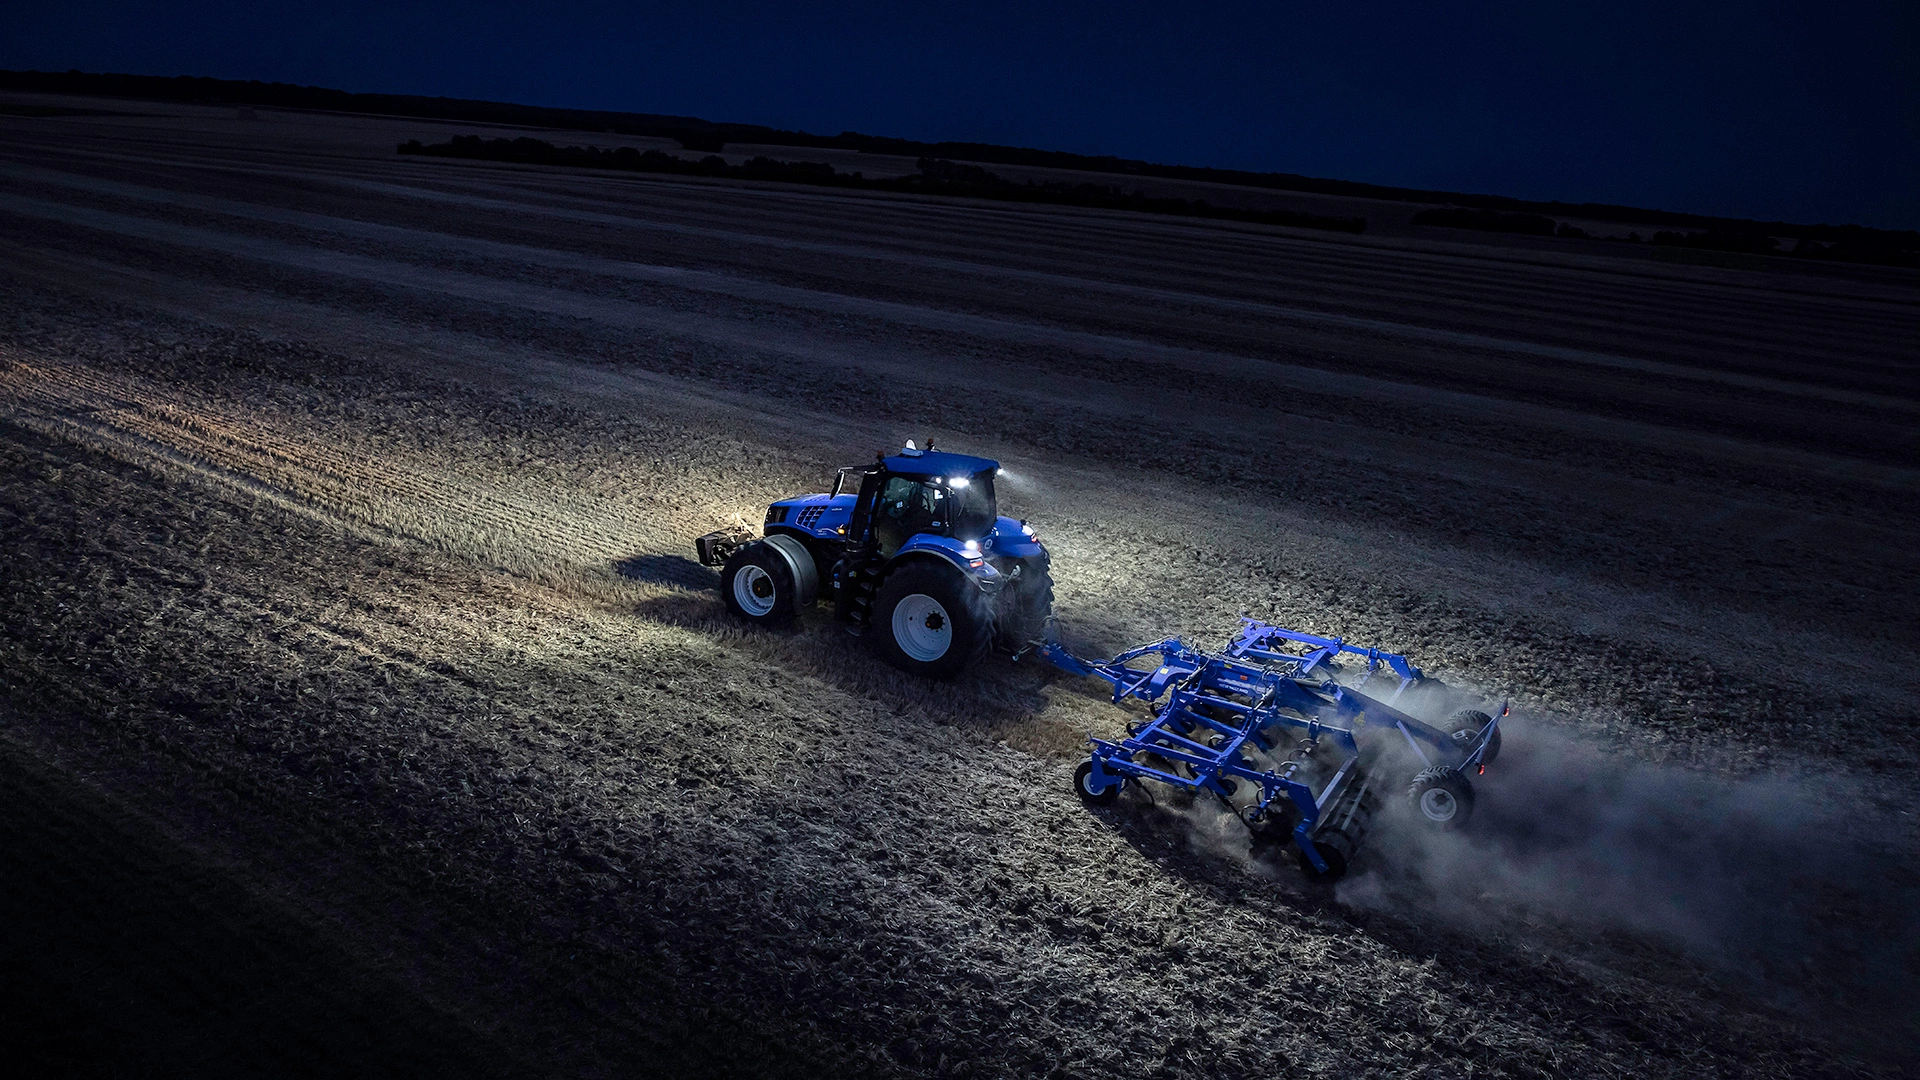 T8 Genesis tractor tilling soil in an expansive agricultural field during the night